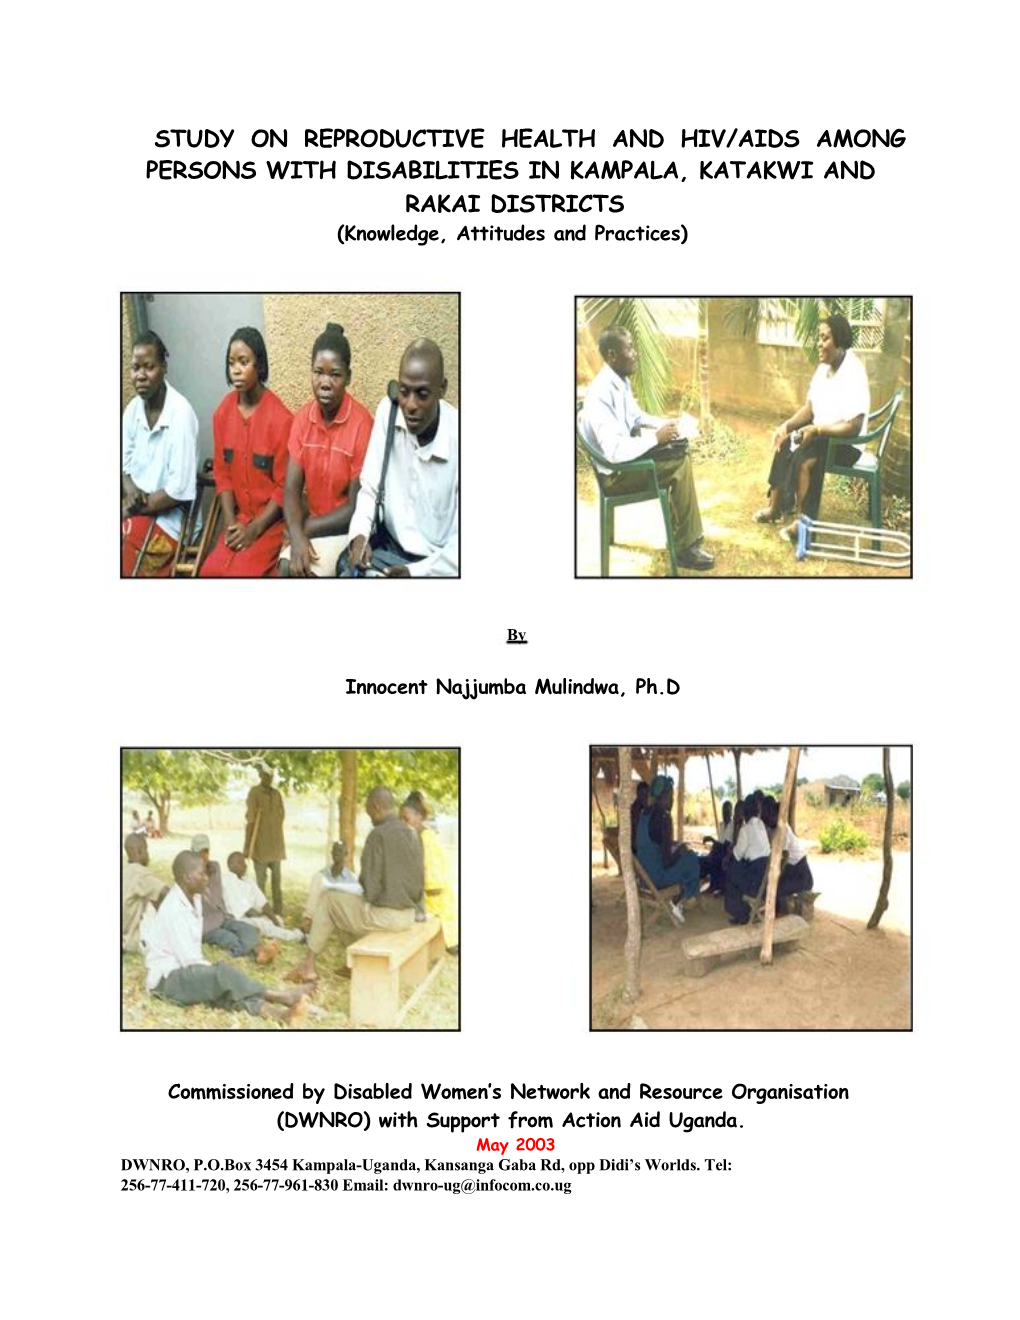 STUDY on REPRODUCTIVE HEALTH and HIV/AIDS AMONG PERSONS with DISABILITIES in KAMPALA, KATAKWI and RAKAI DISTRICTS (Knowledge, Attitudes and Practices)